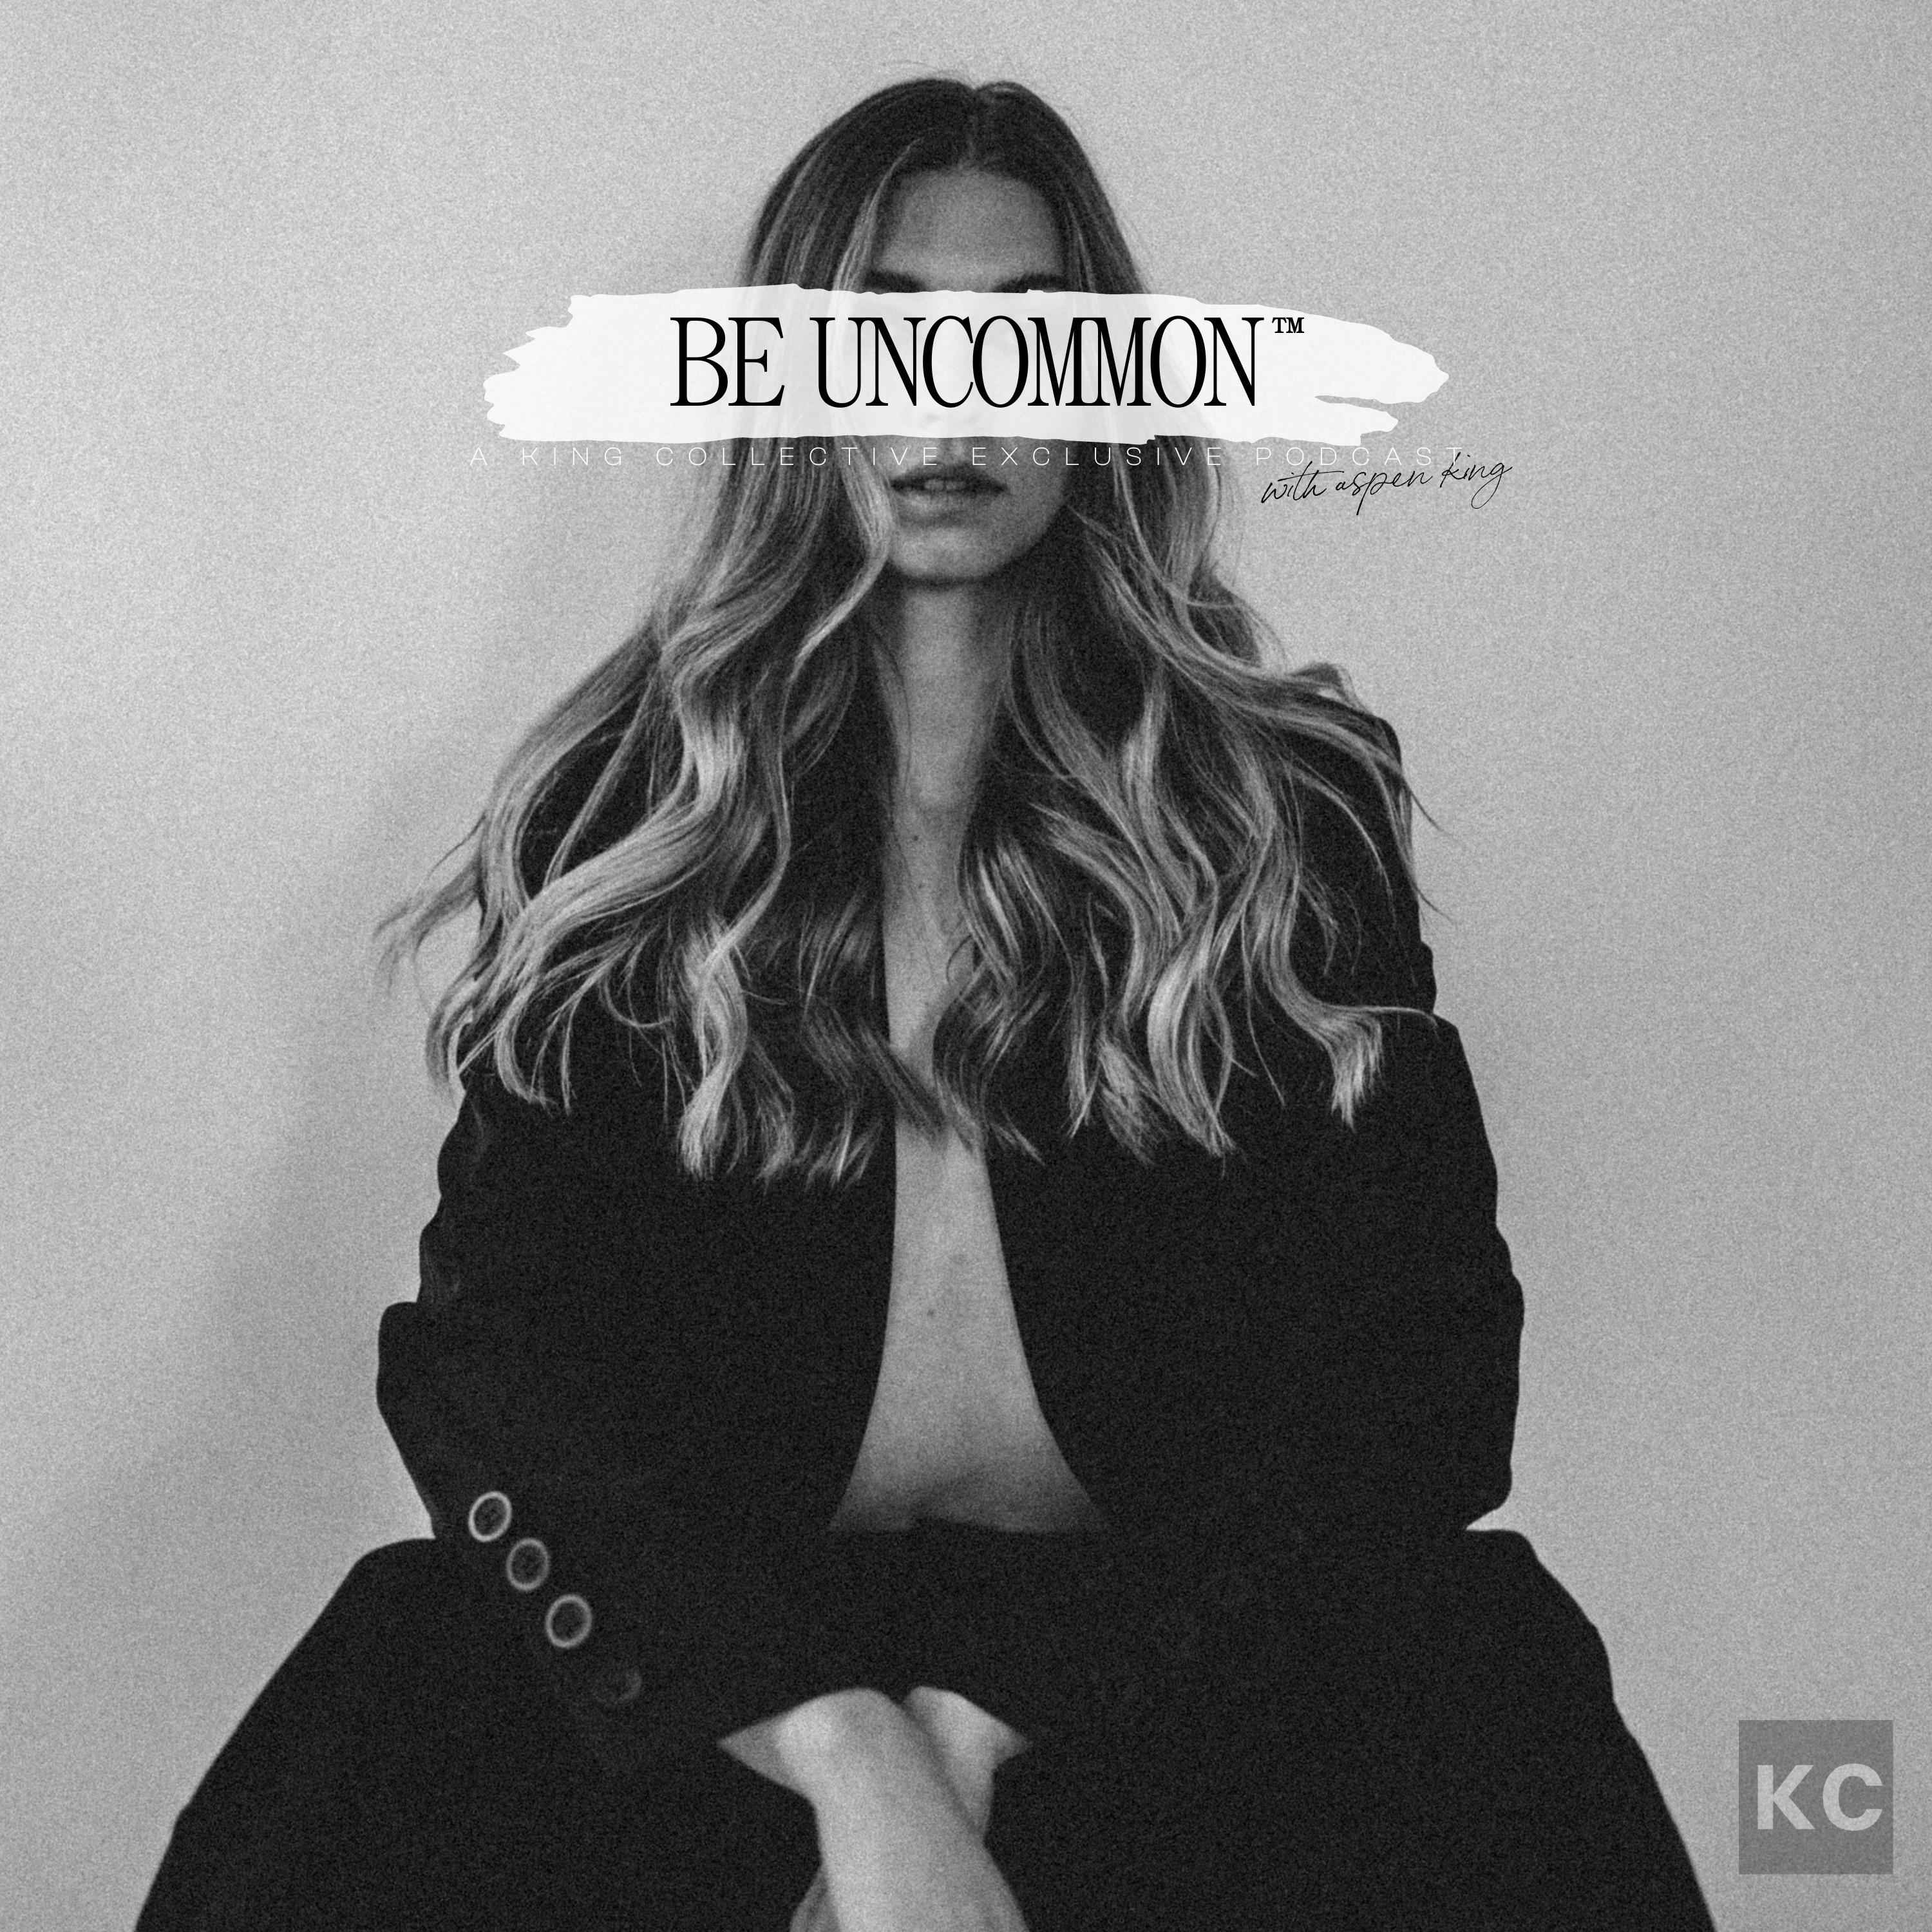 Be Uncommon by King Collective